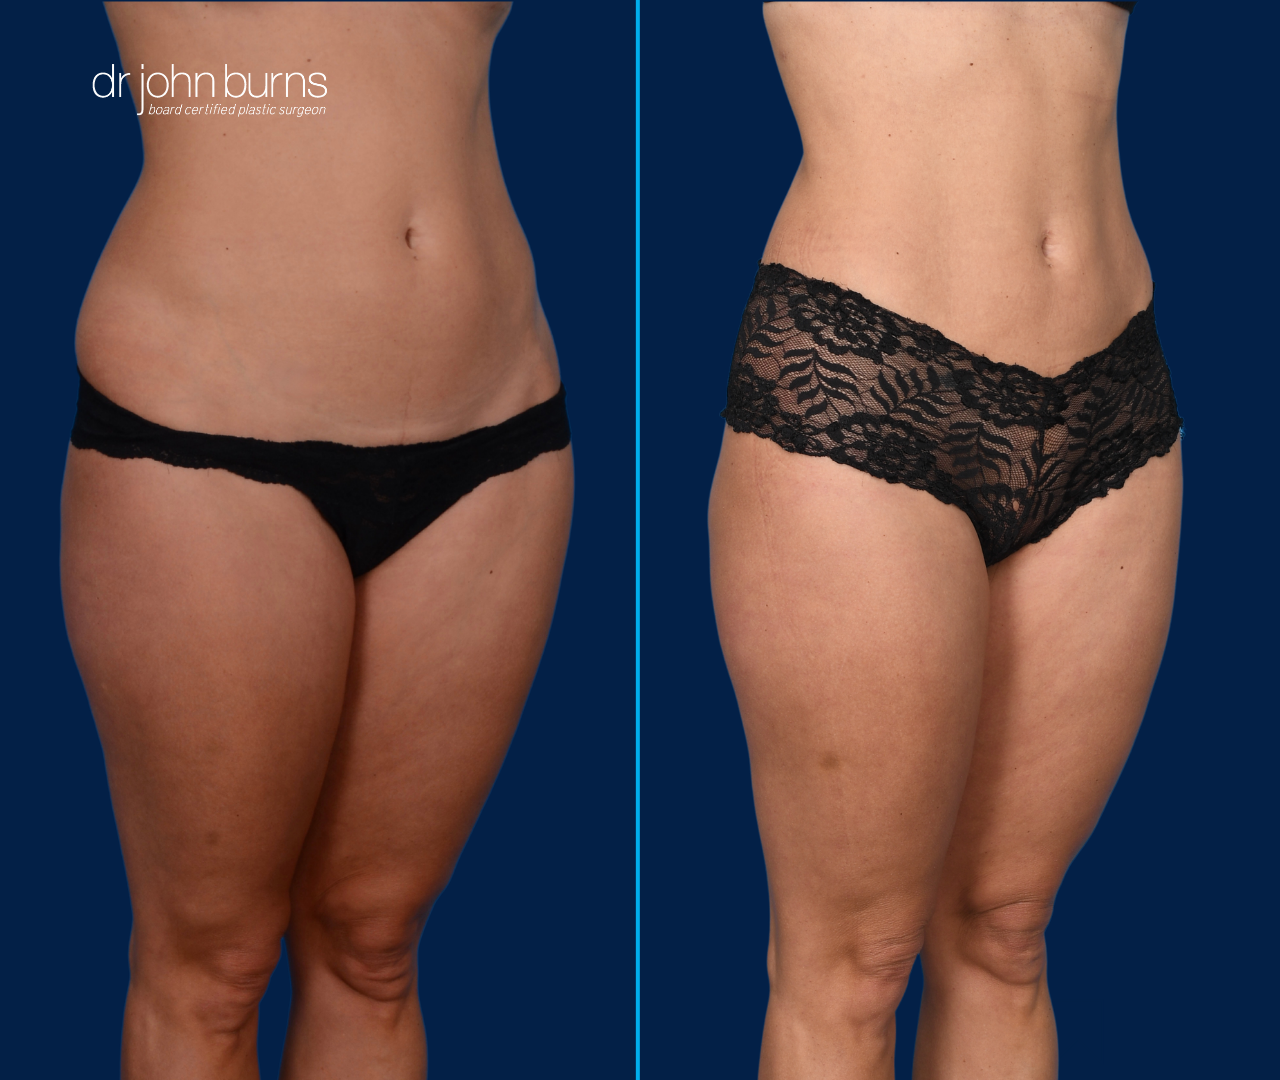 Case 2- 45 Degree View | Before & After Mini Tummy Tuck with Abdominal Etching by Dallas Plastic Surgeon, Dr. John Burns